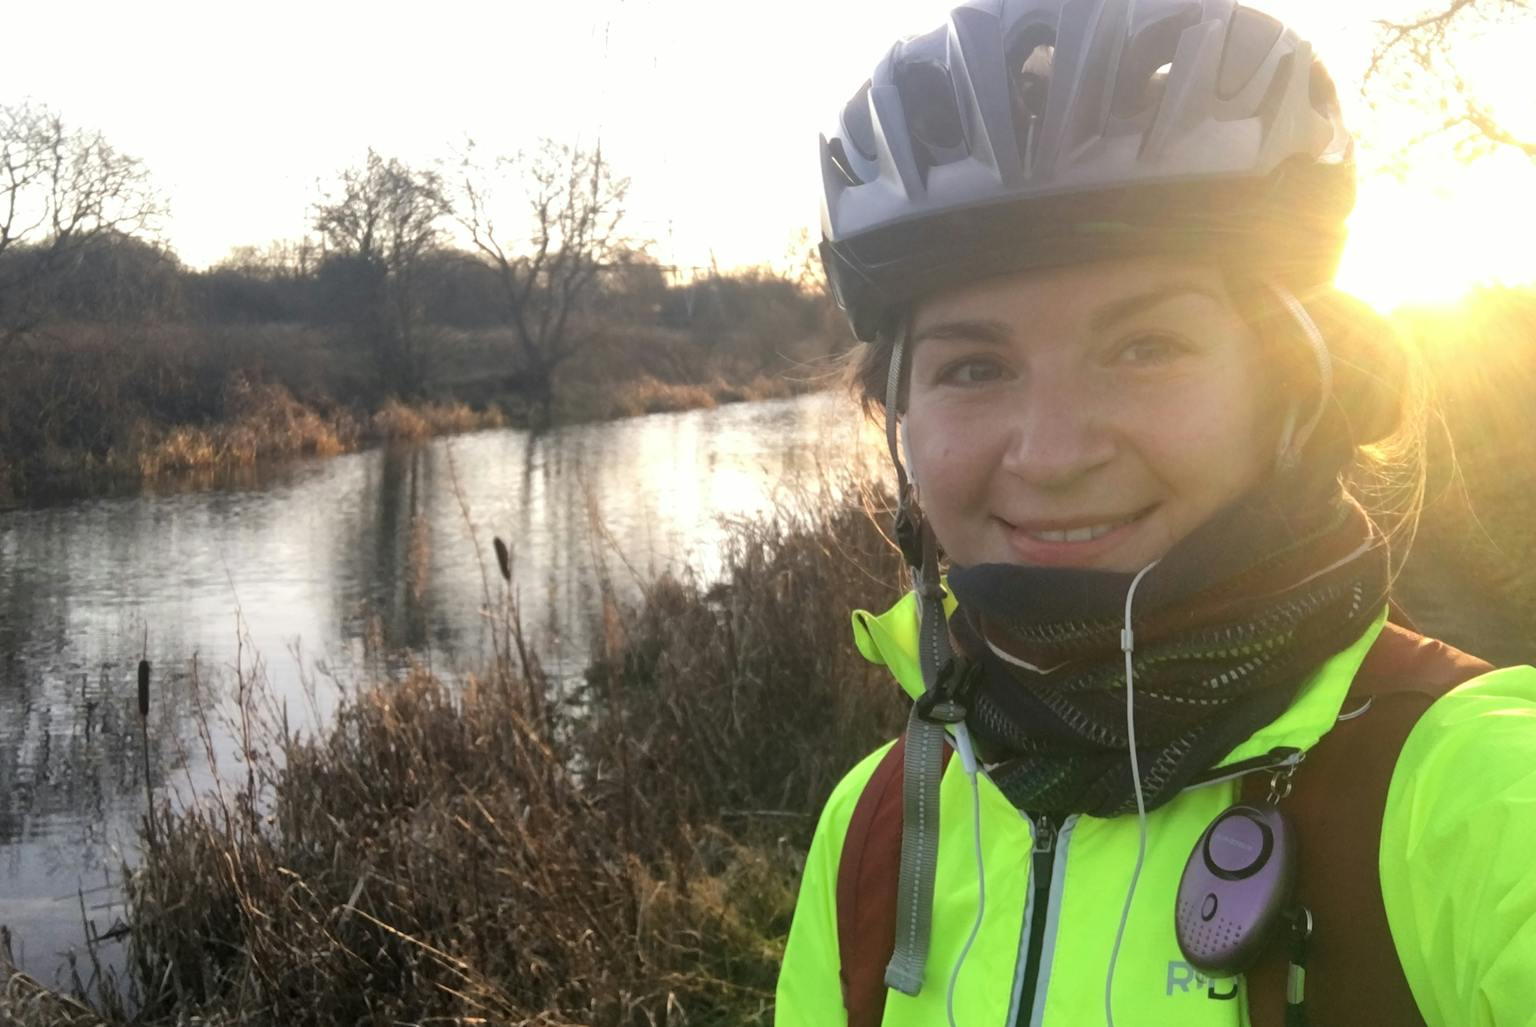 LUC ecologist Heather Lafferty is swapping her daily train commutes for a 30 km cycle ride for charity.